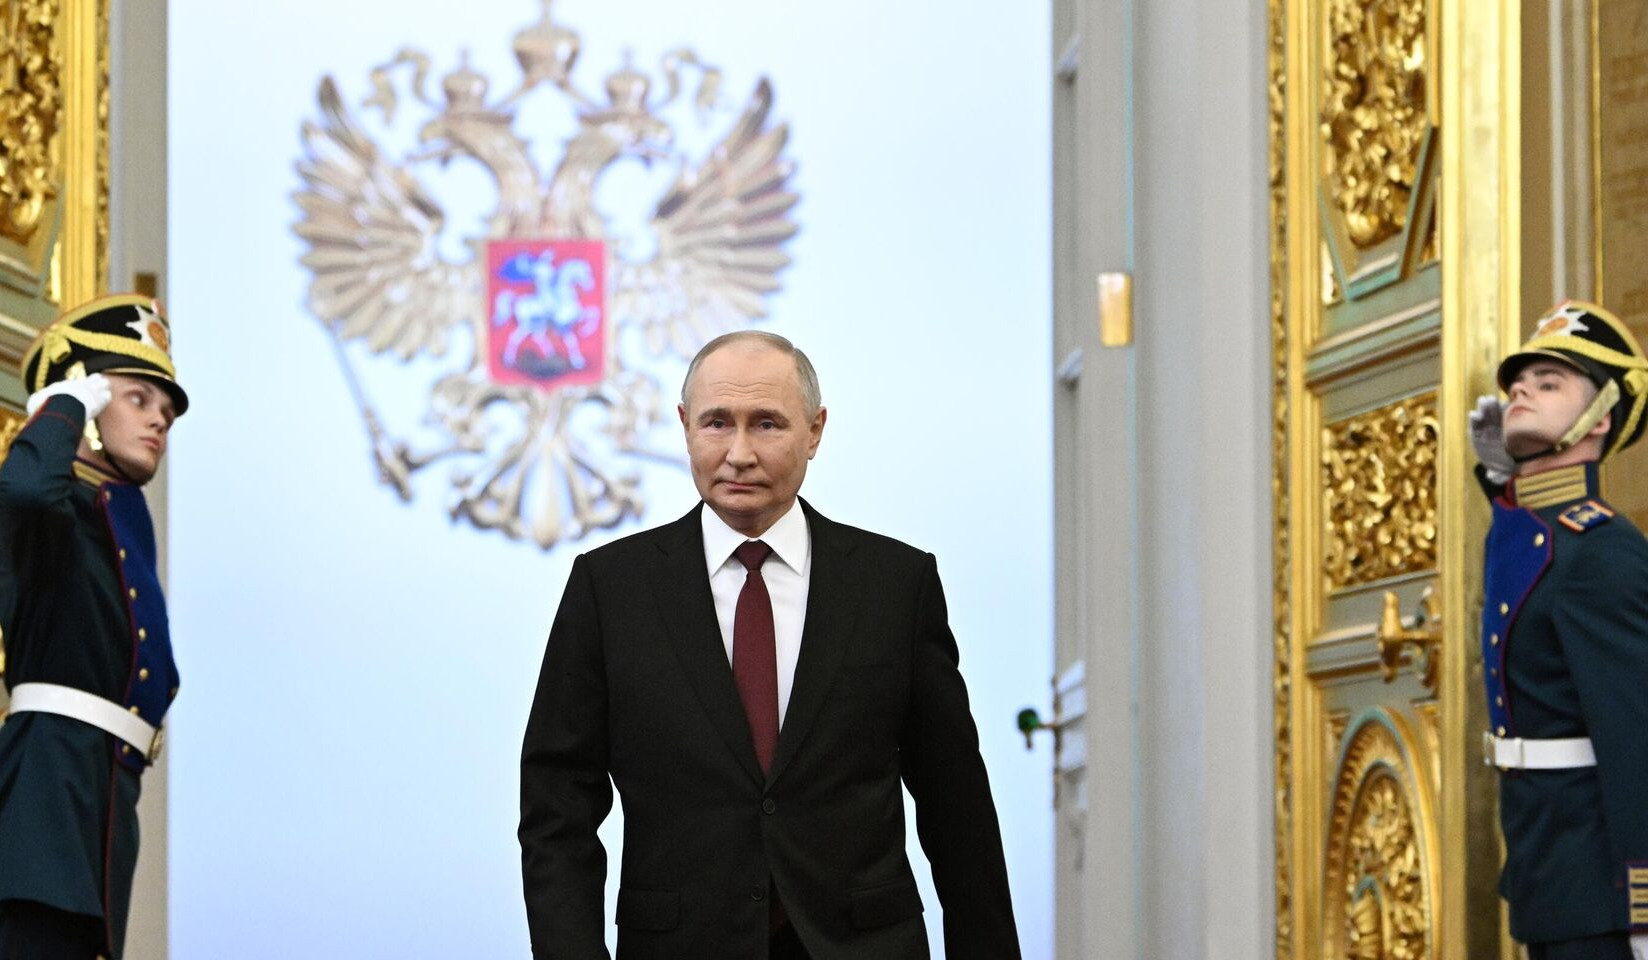 Russia's Vladimir Putin sworn in as president for the fifth term